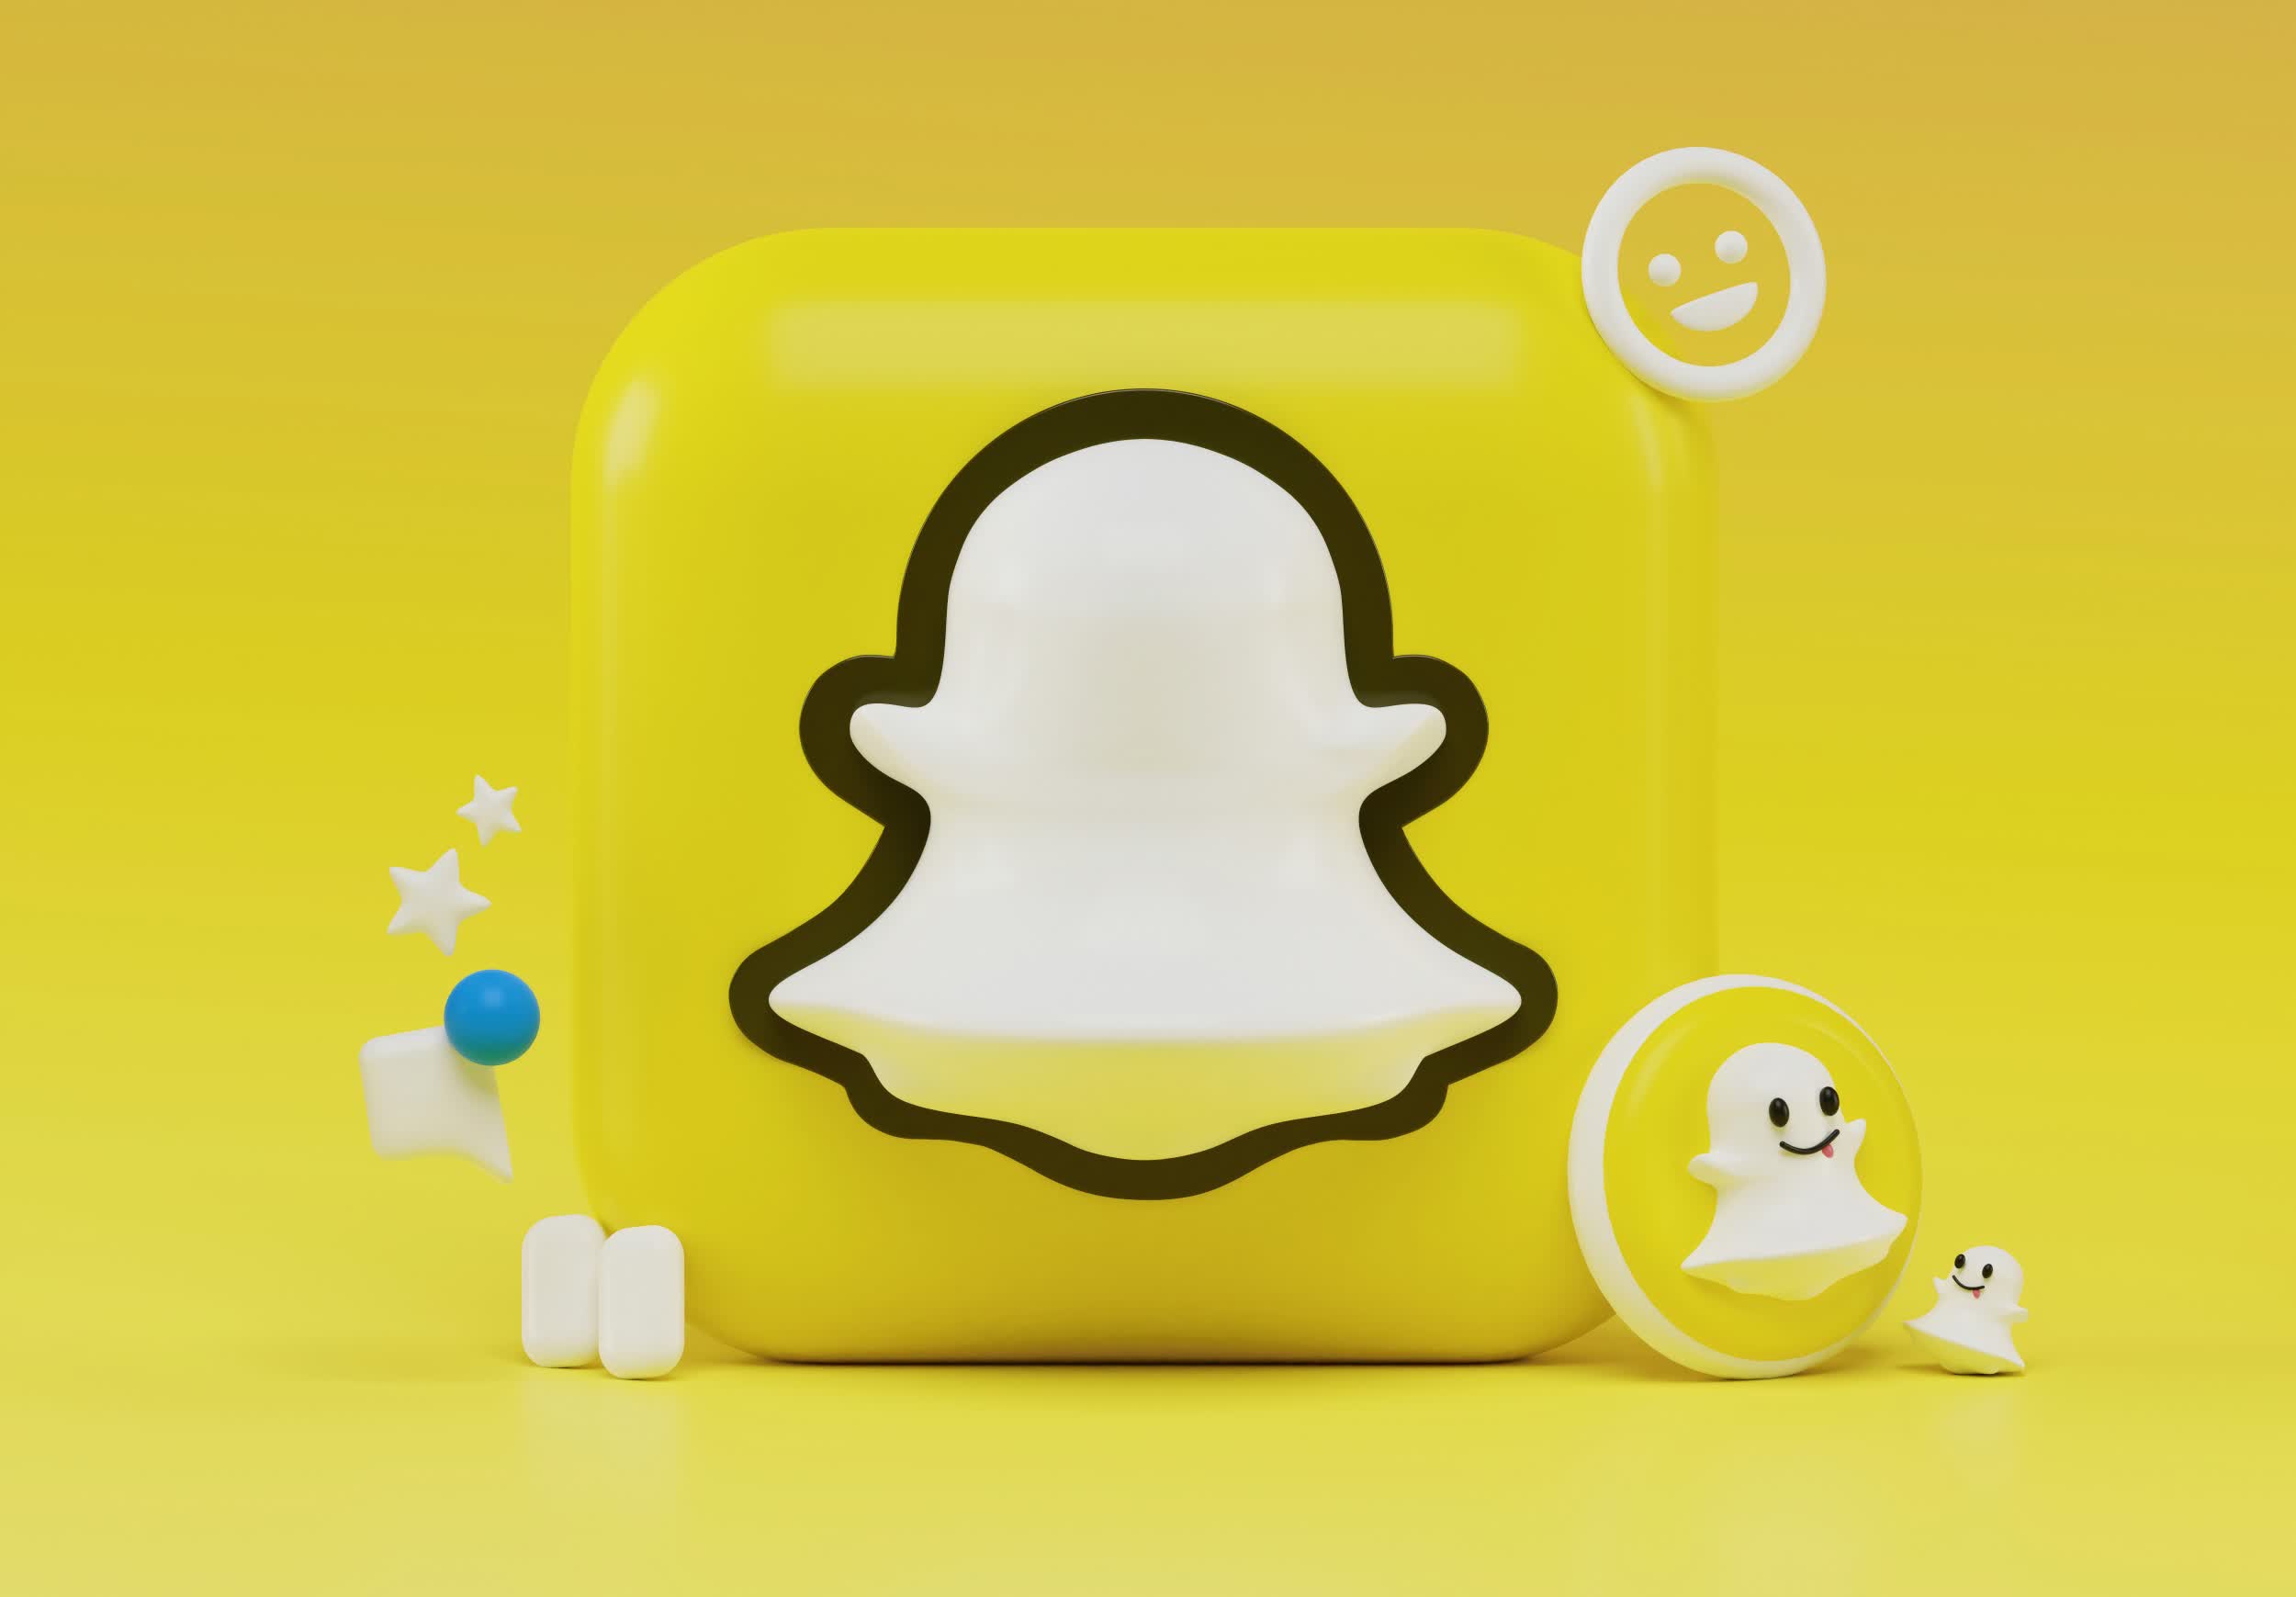 Snap is testing a paid subscription plan called Snapchat Plus